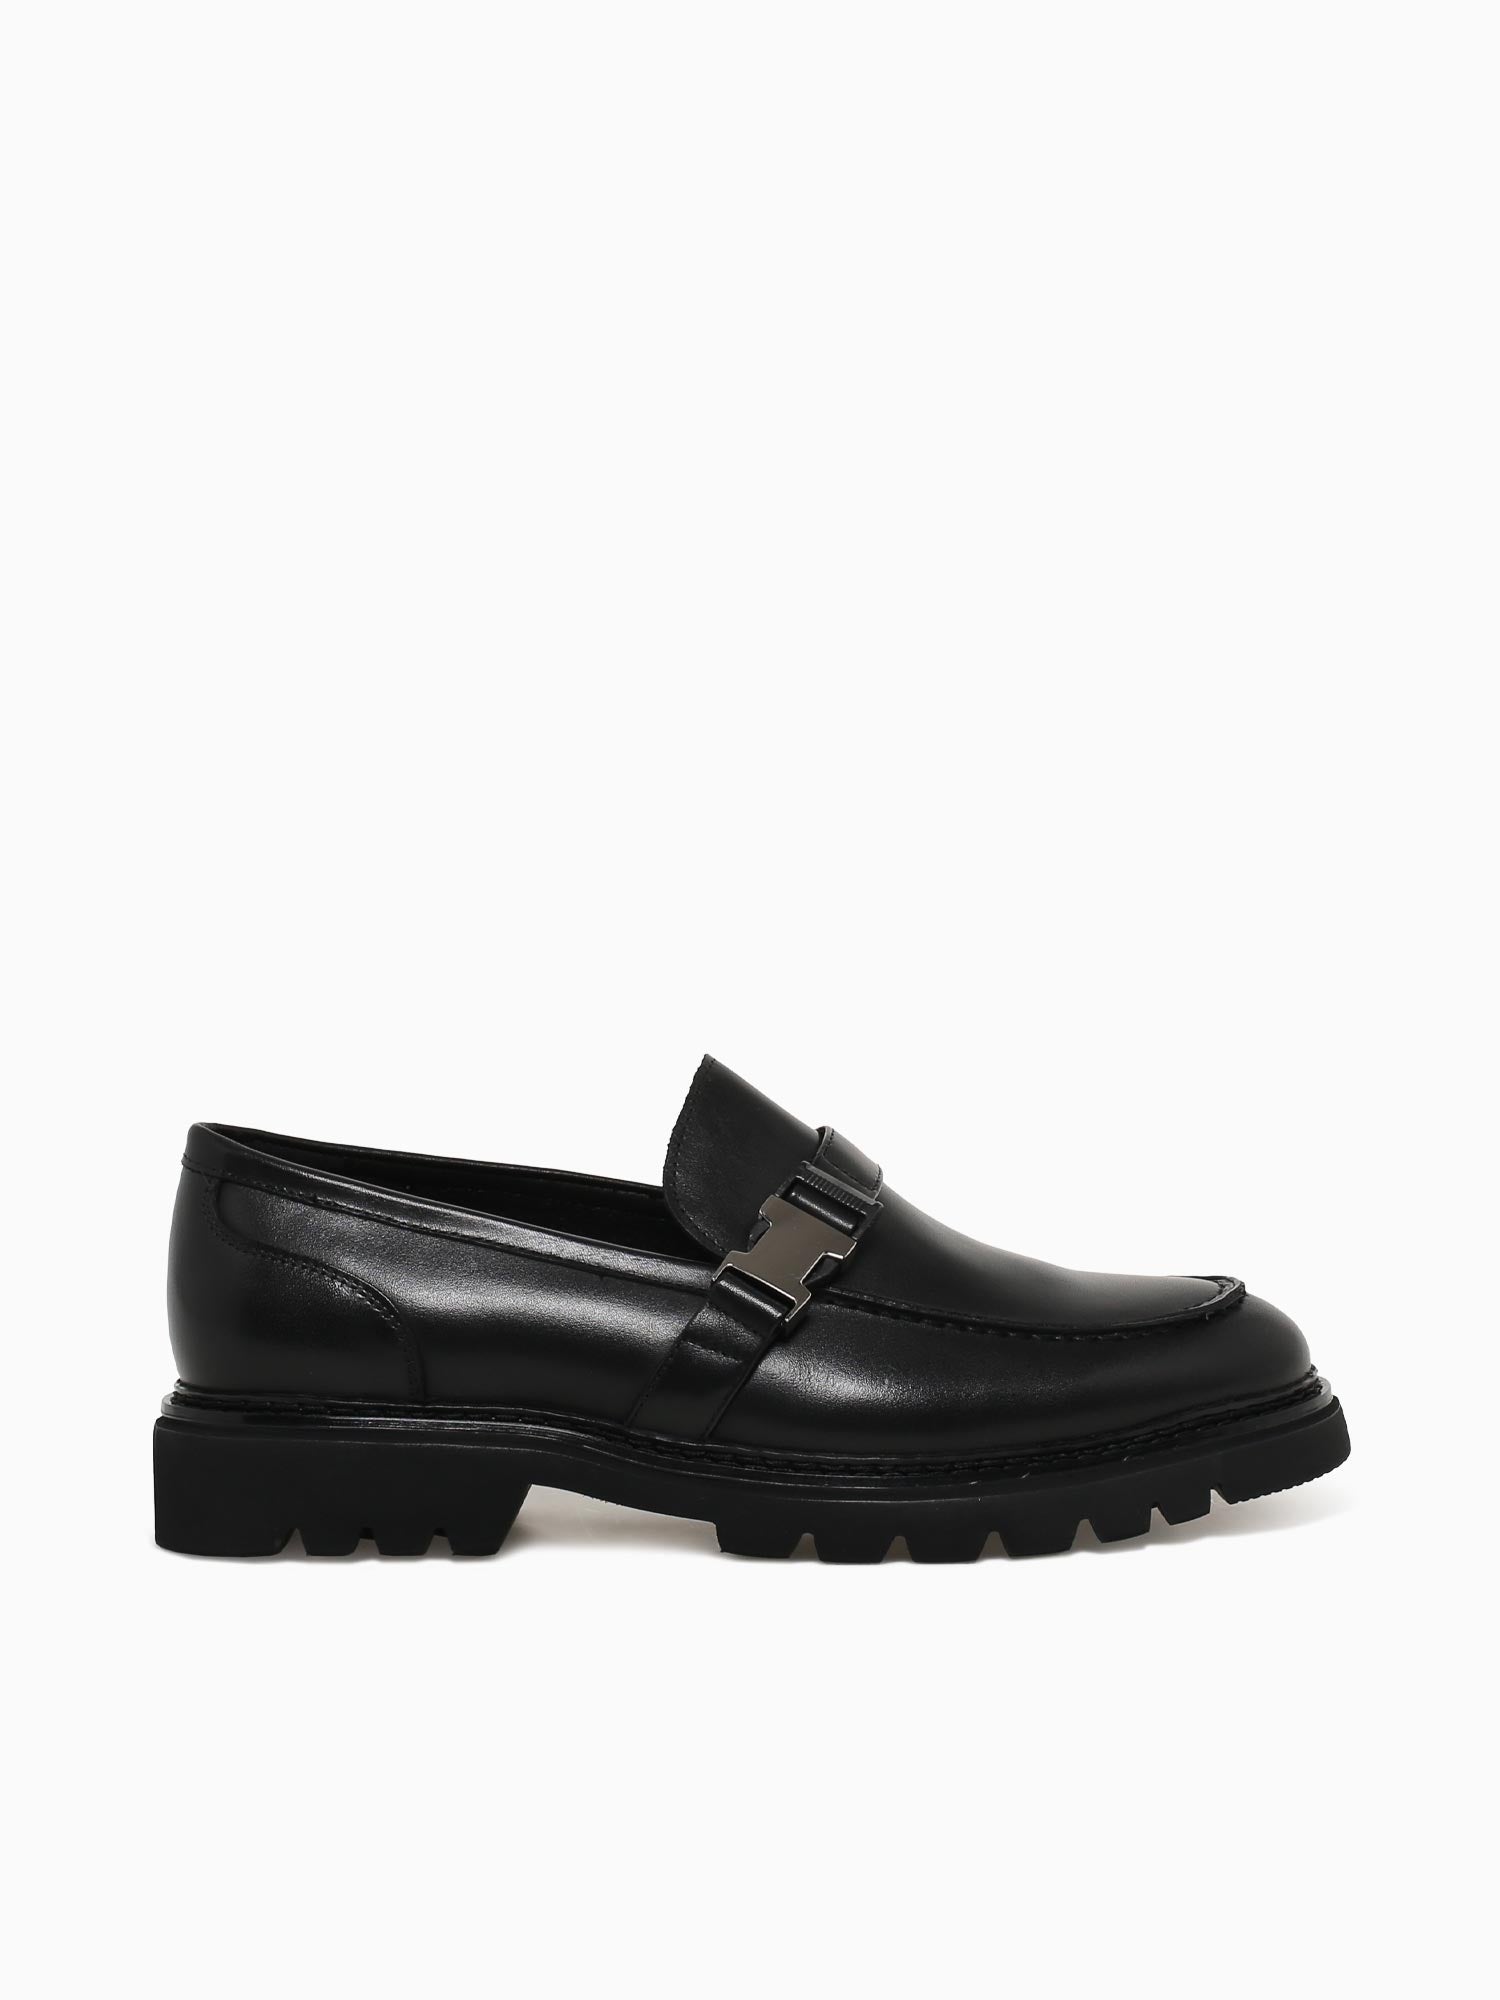 Rogelio Black Brushed Calf Leather